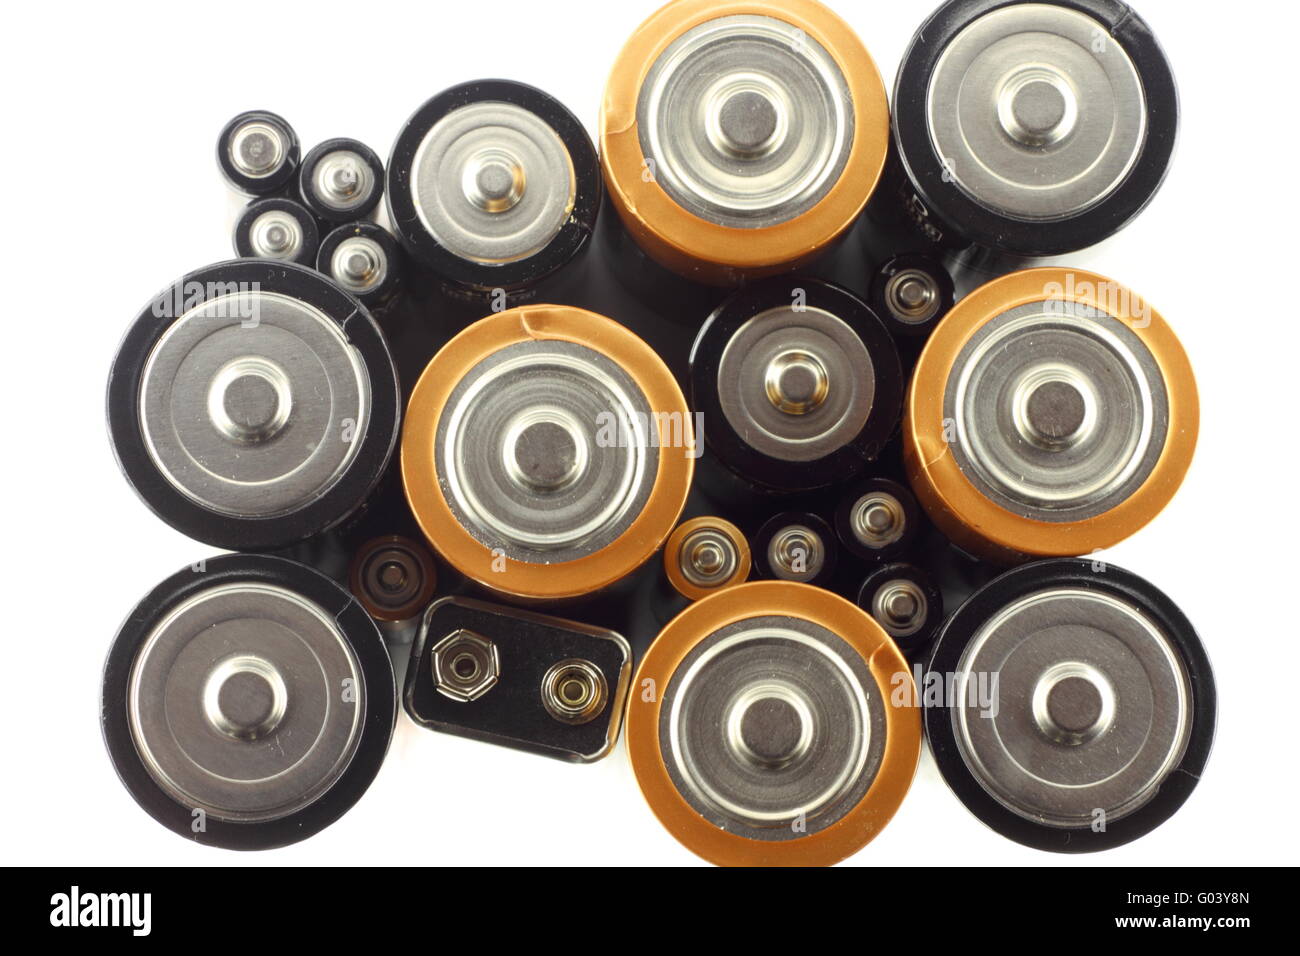 Many various batteries on the white background Stock Photo